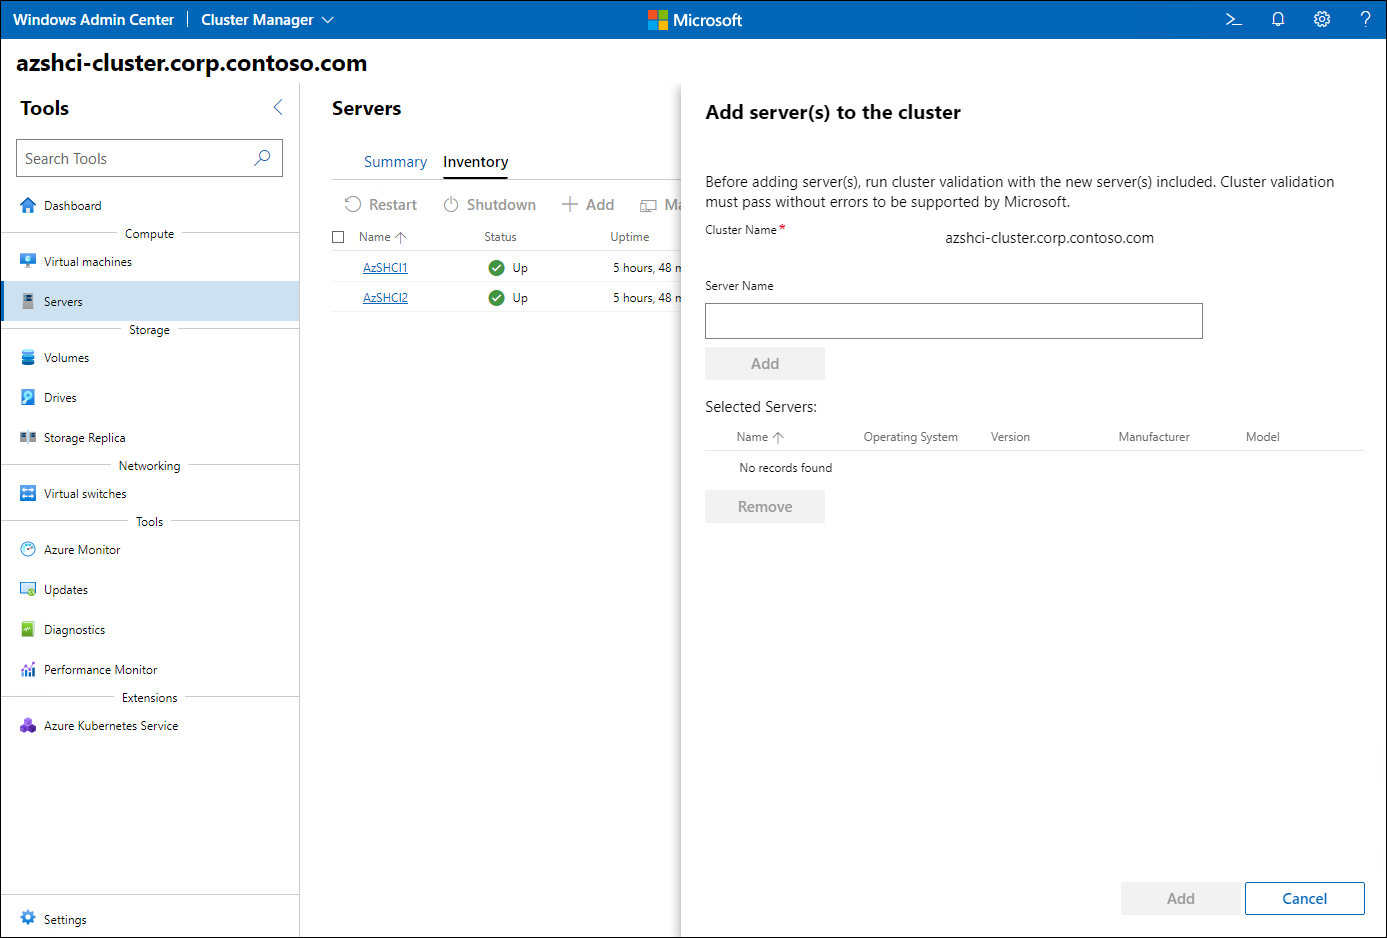 The screenshot depicts the Cluster Manager interface of Windows Admin Center displaying the Add server(s) to the cluster pane.